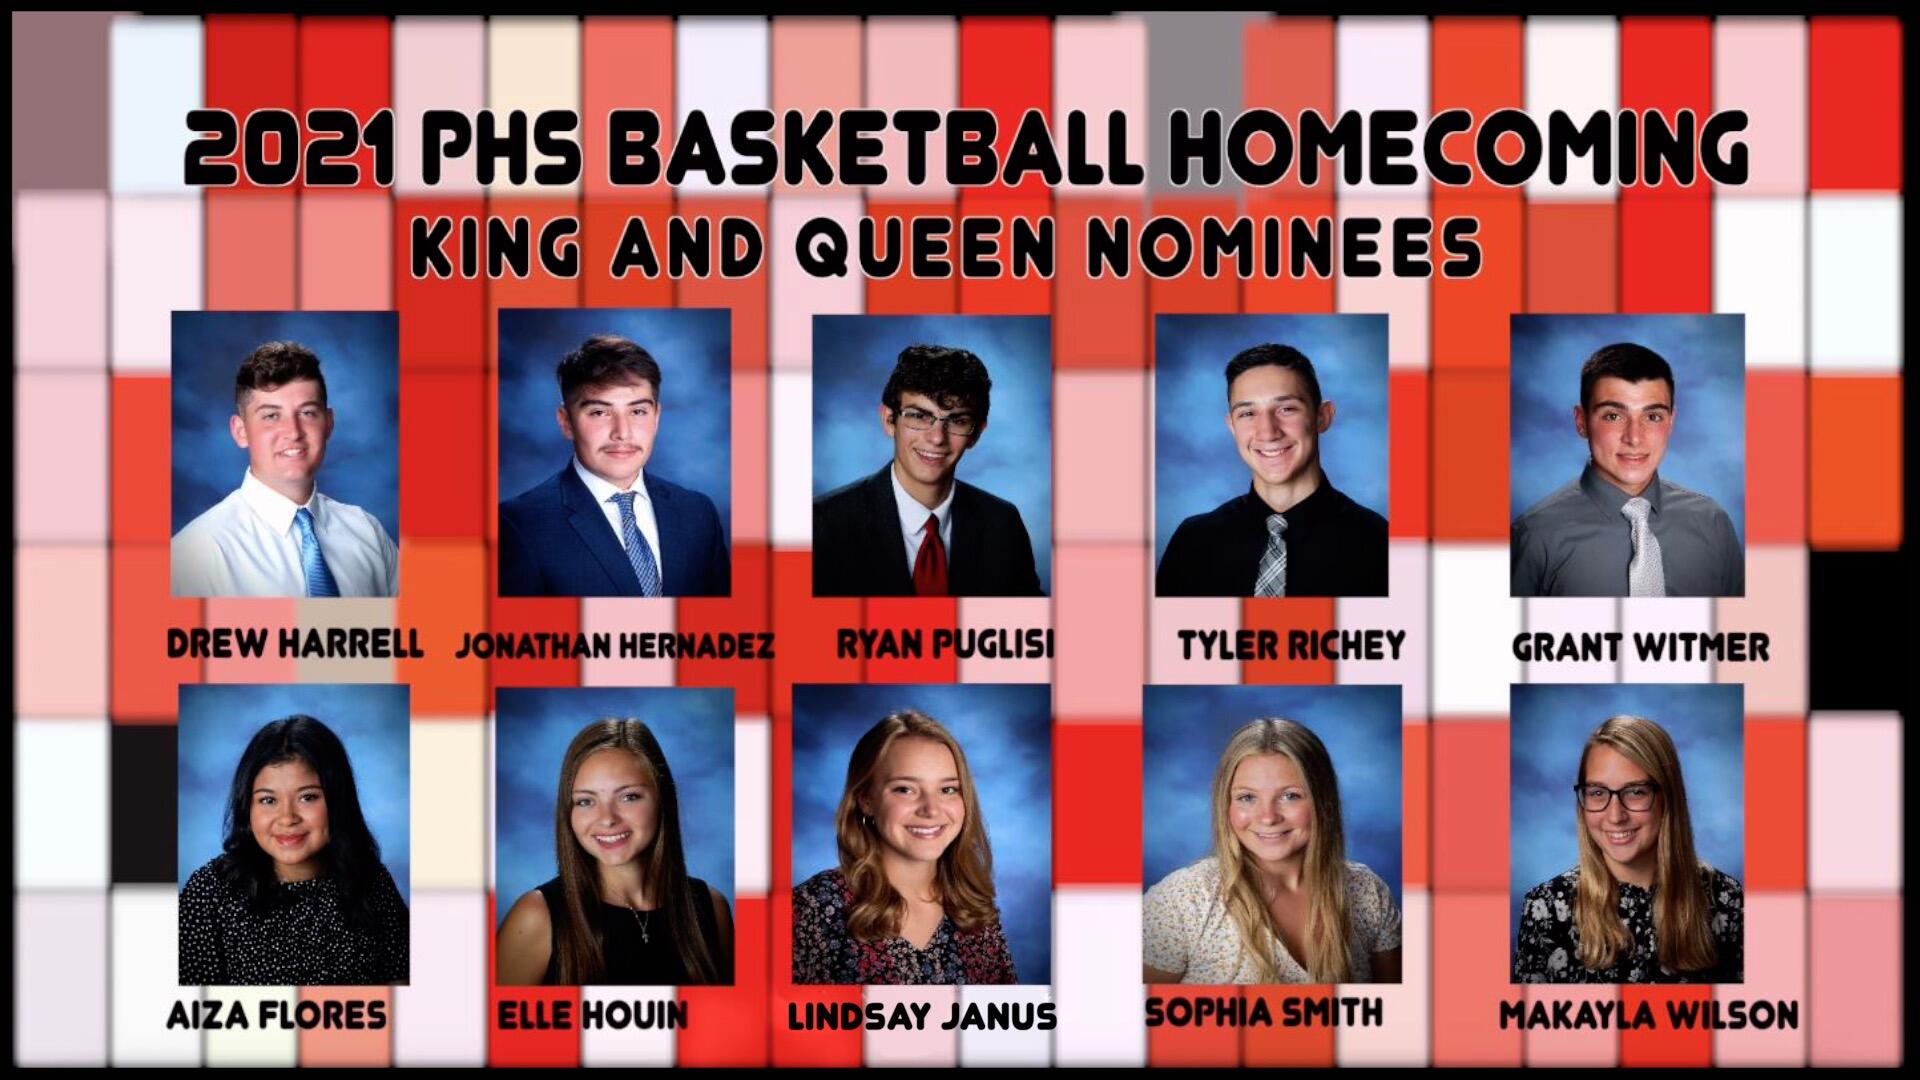 2021 PHS Basketball Homecoming King and Queen Nominees - pictures and names